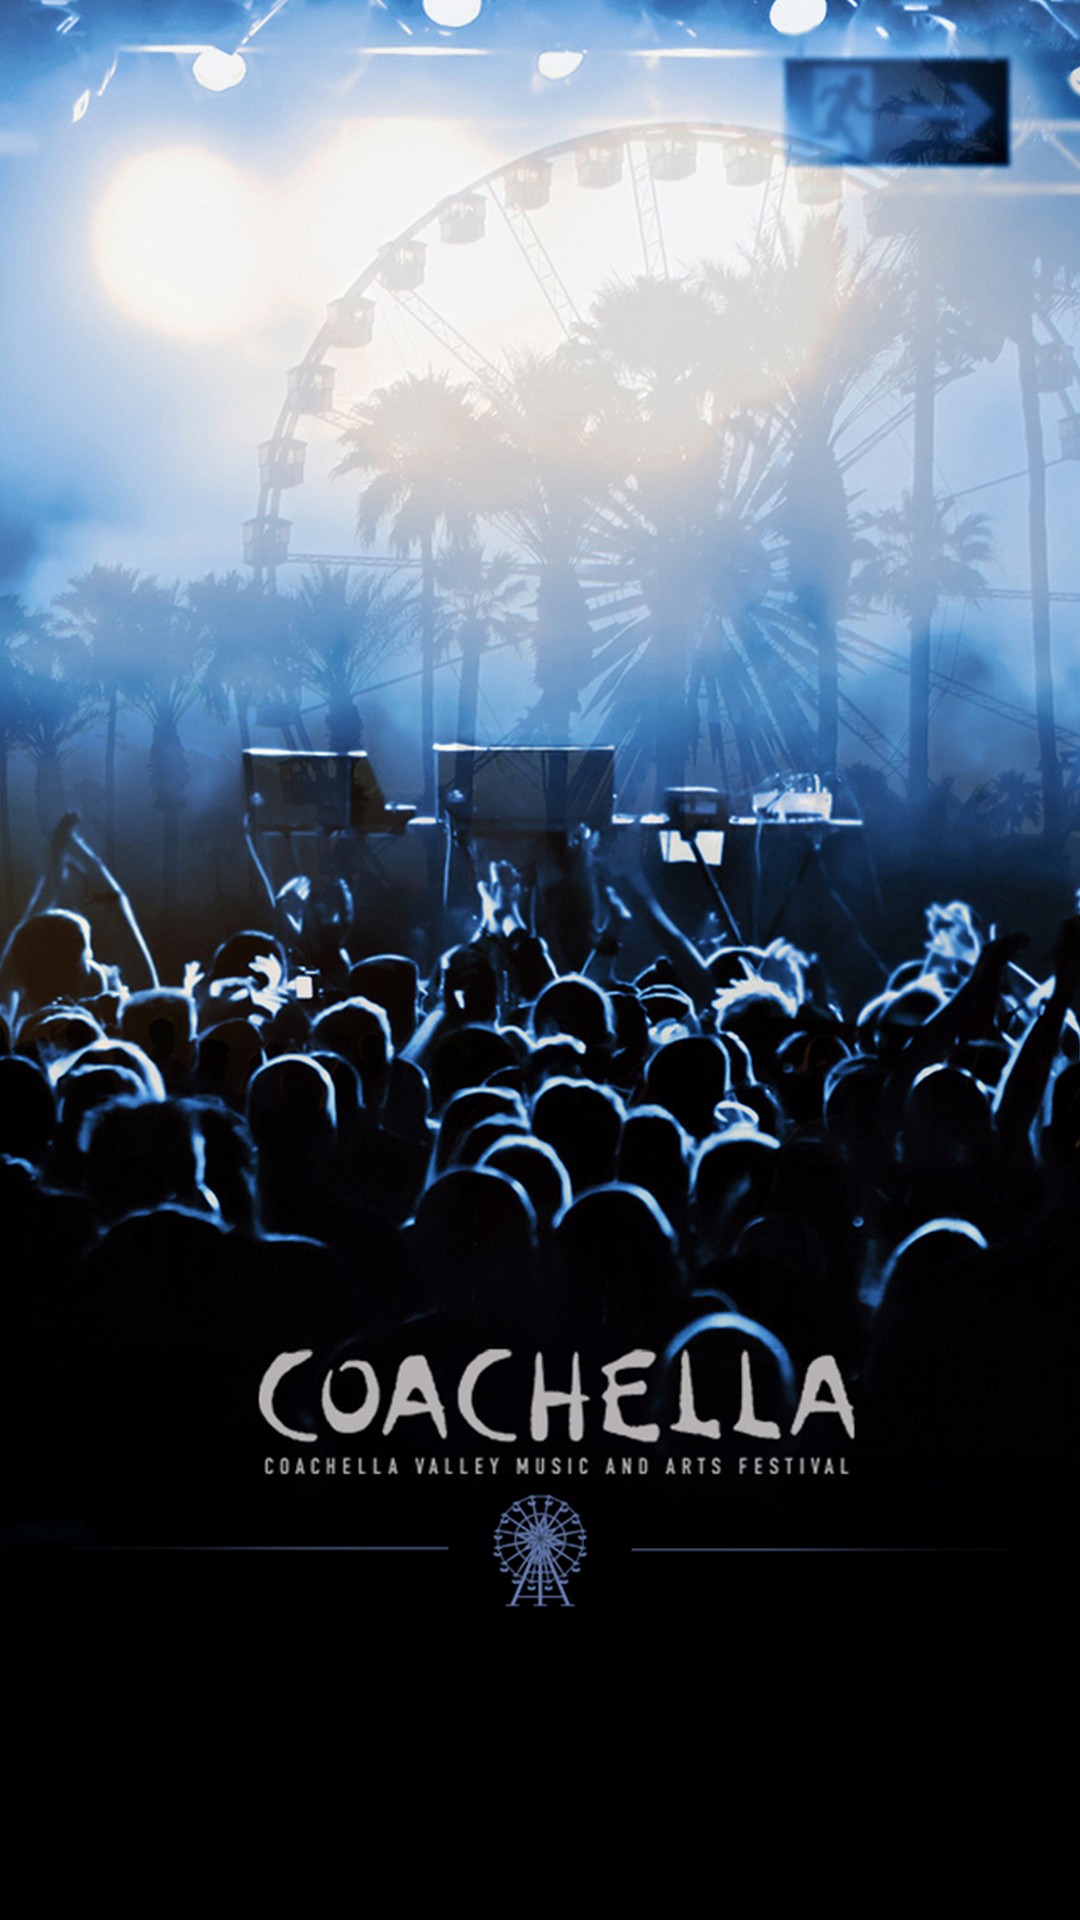 Coachella 2019 Wallpaper iPhone with high-resolution 1080x1920 pixel. You can use this wallpaper for your iPhone 5, 6, 7, 8, X, XS, XR backgrounds, Mobile Screensaver, or iPad Lock Screen